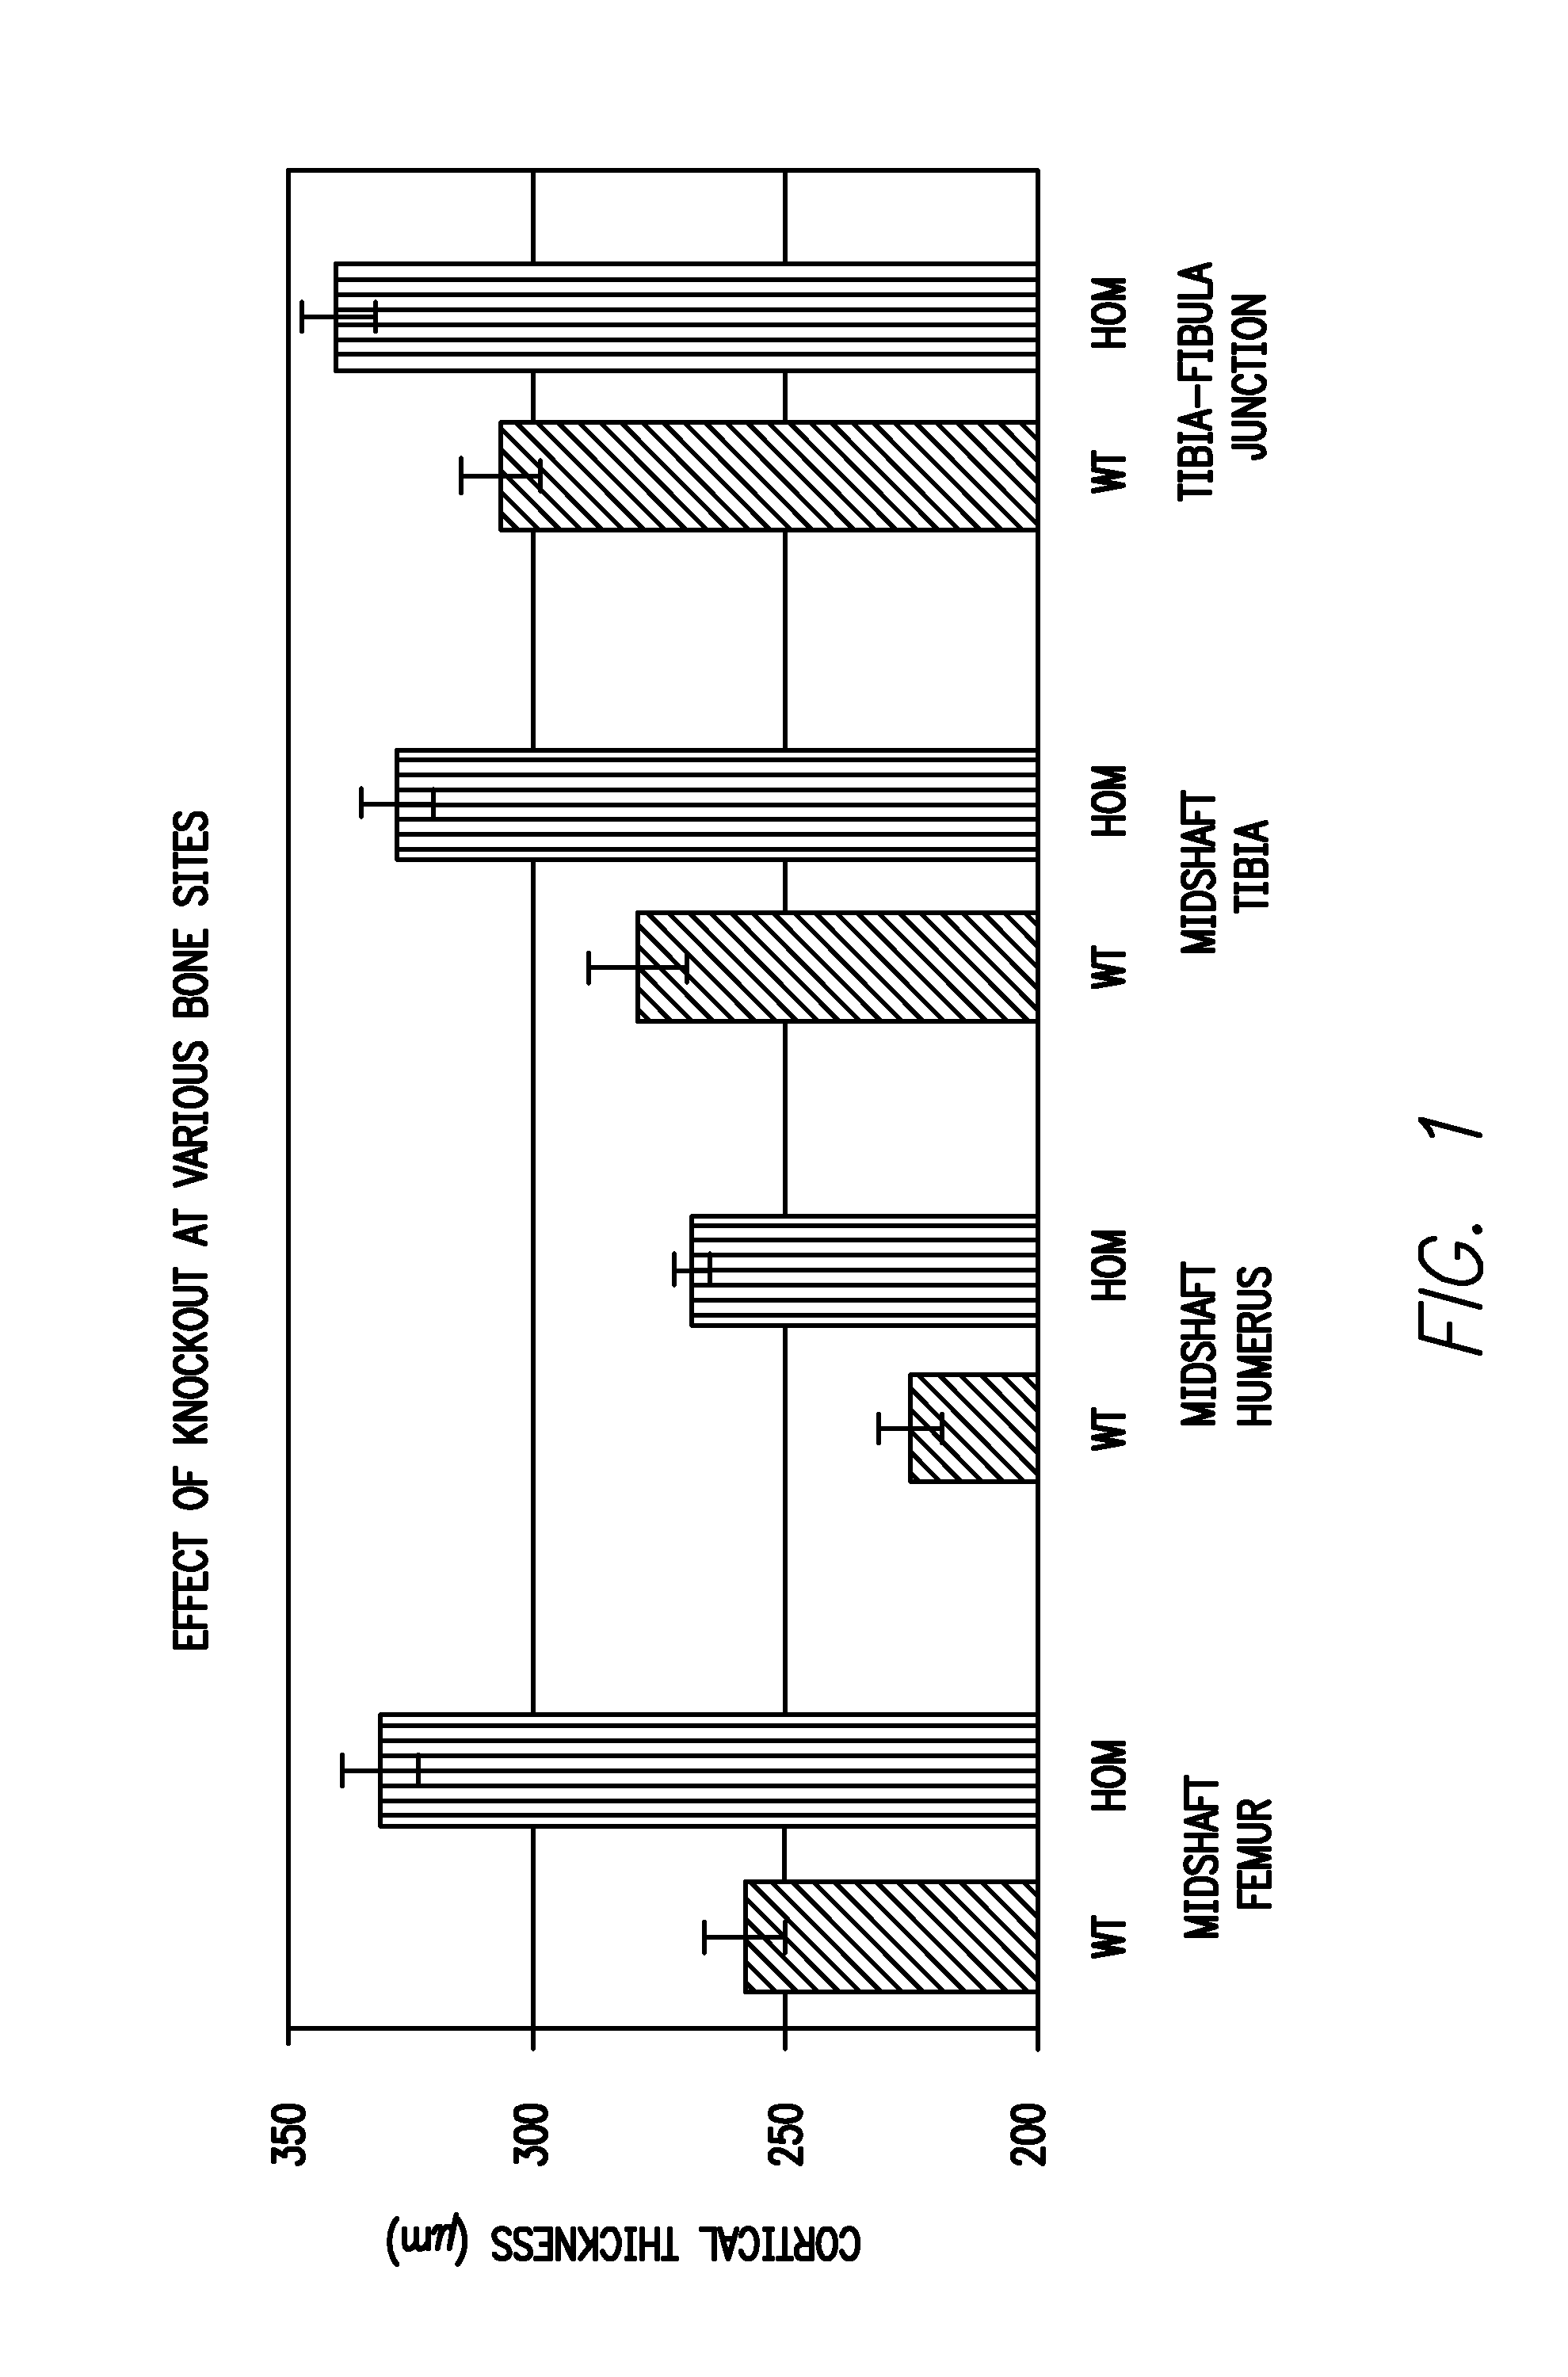 Inhibitors of notum pectinacetylesterase and methods of their use